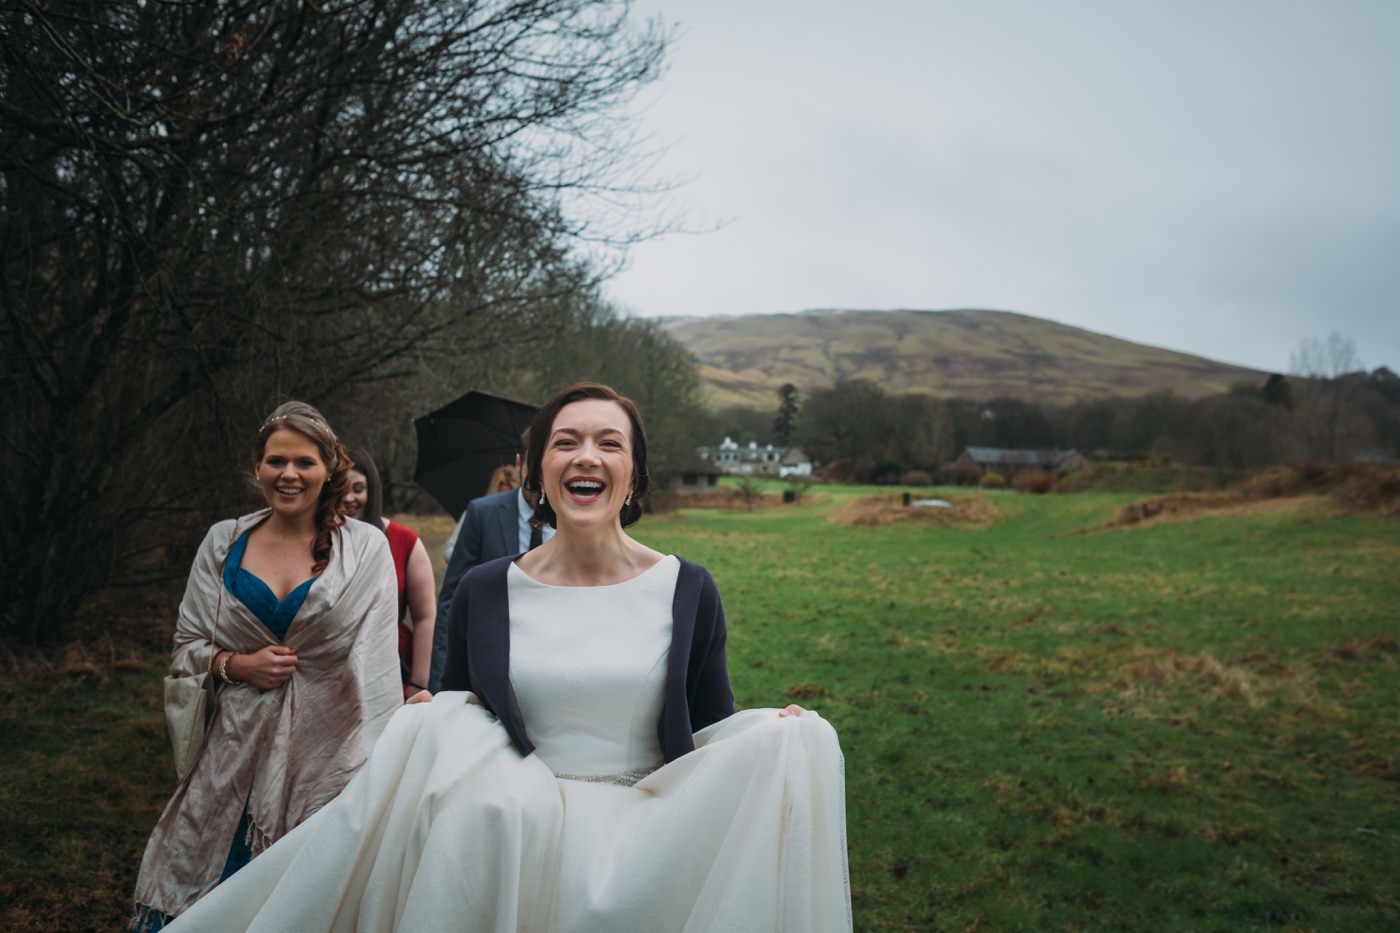 Laura can't stop laughing at how bad the weather is, but got married out in it anyway!